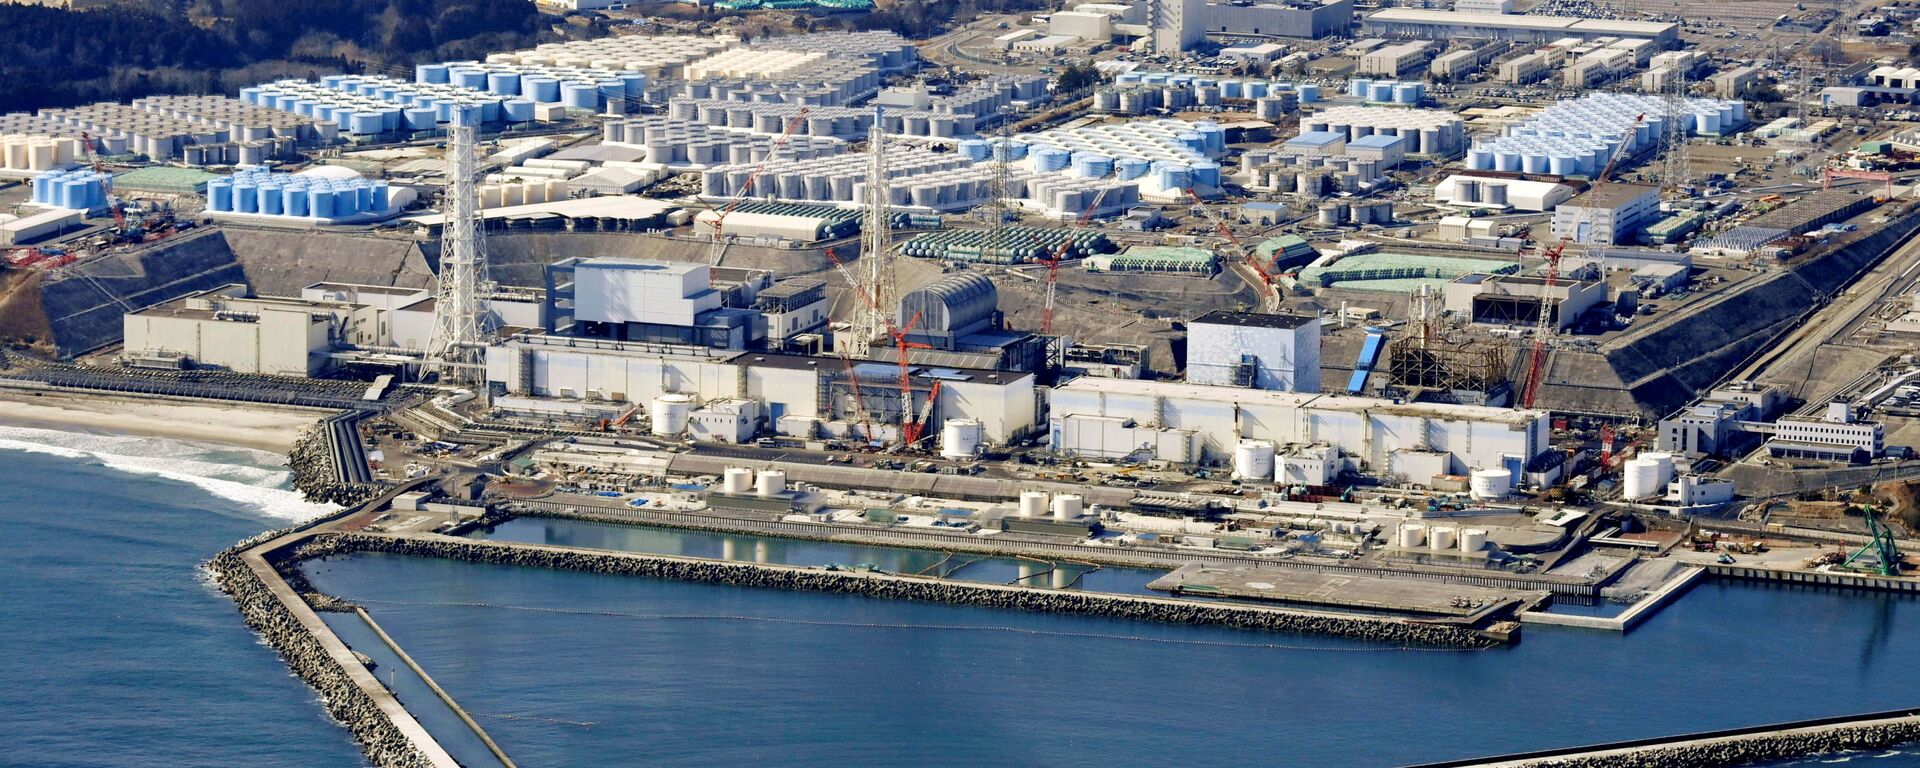 An aerial view shows the storage tanks for treated water at the tsunami-crippled Fukushima Daiichi nuclear power plant in Okuma town, Fukushima prefecture, Japan February 13, 2021, in this photo taken by Kyodo. - Sputnik International, 1920, 15.04.2021